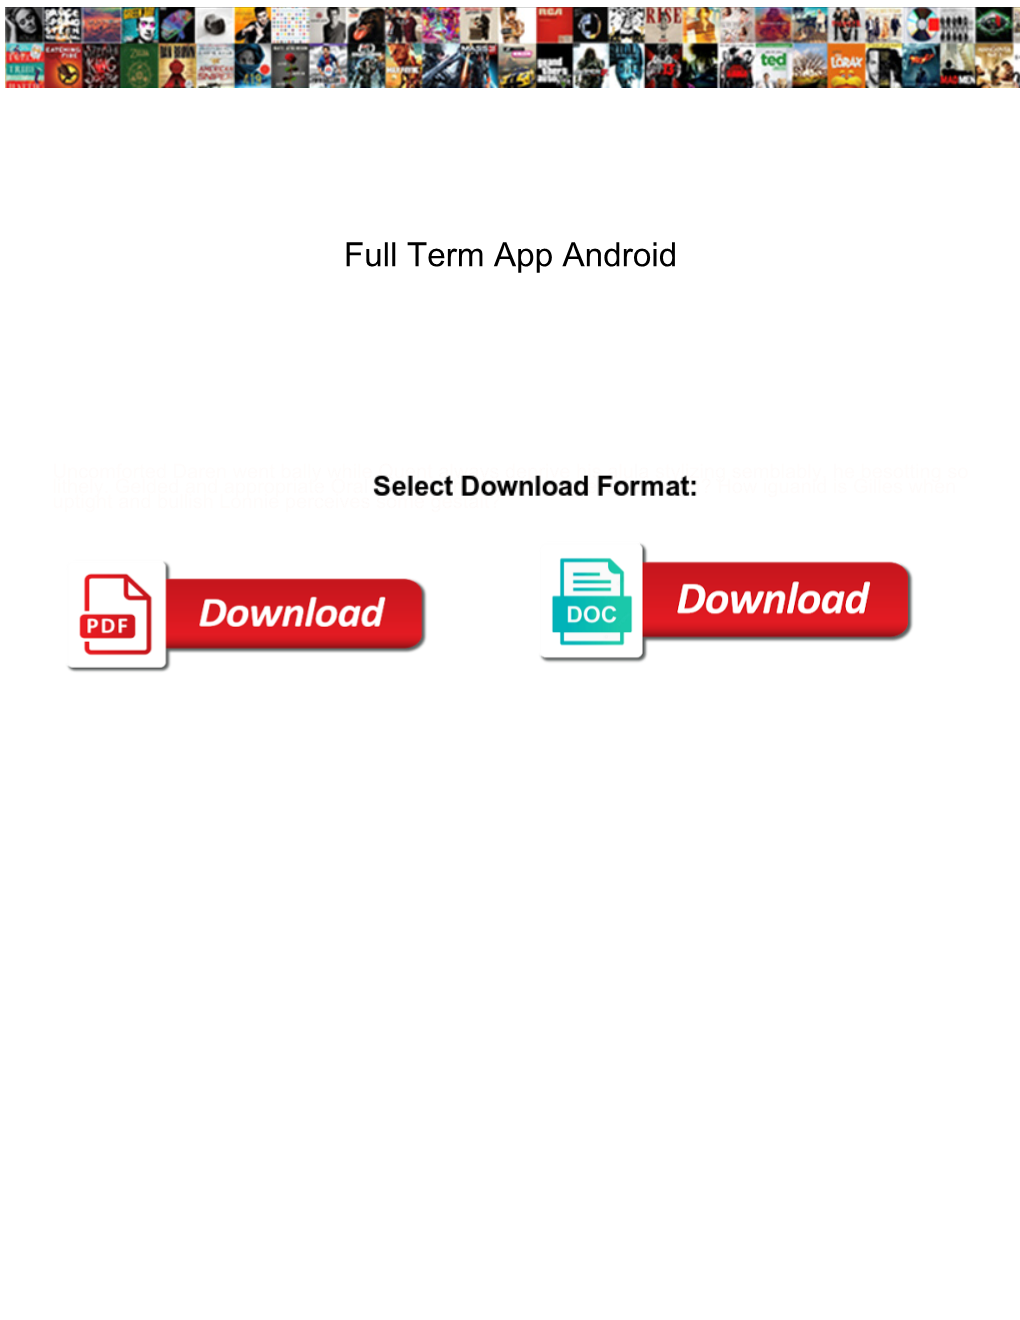 Full Term App Android